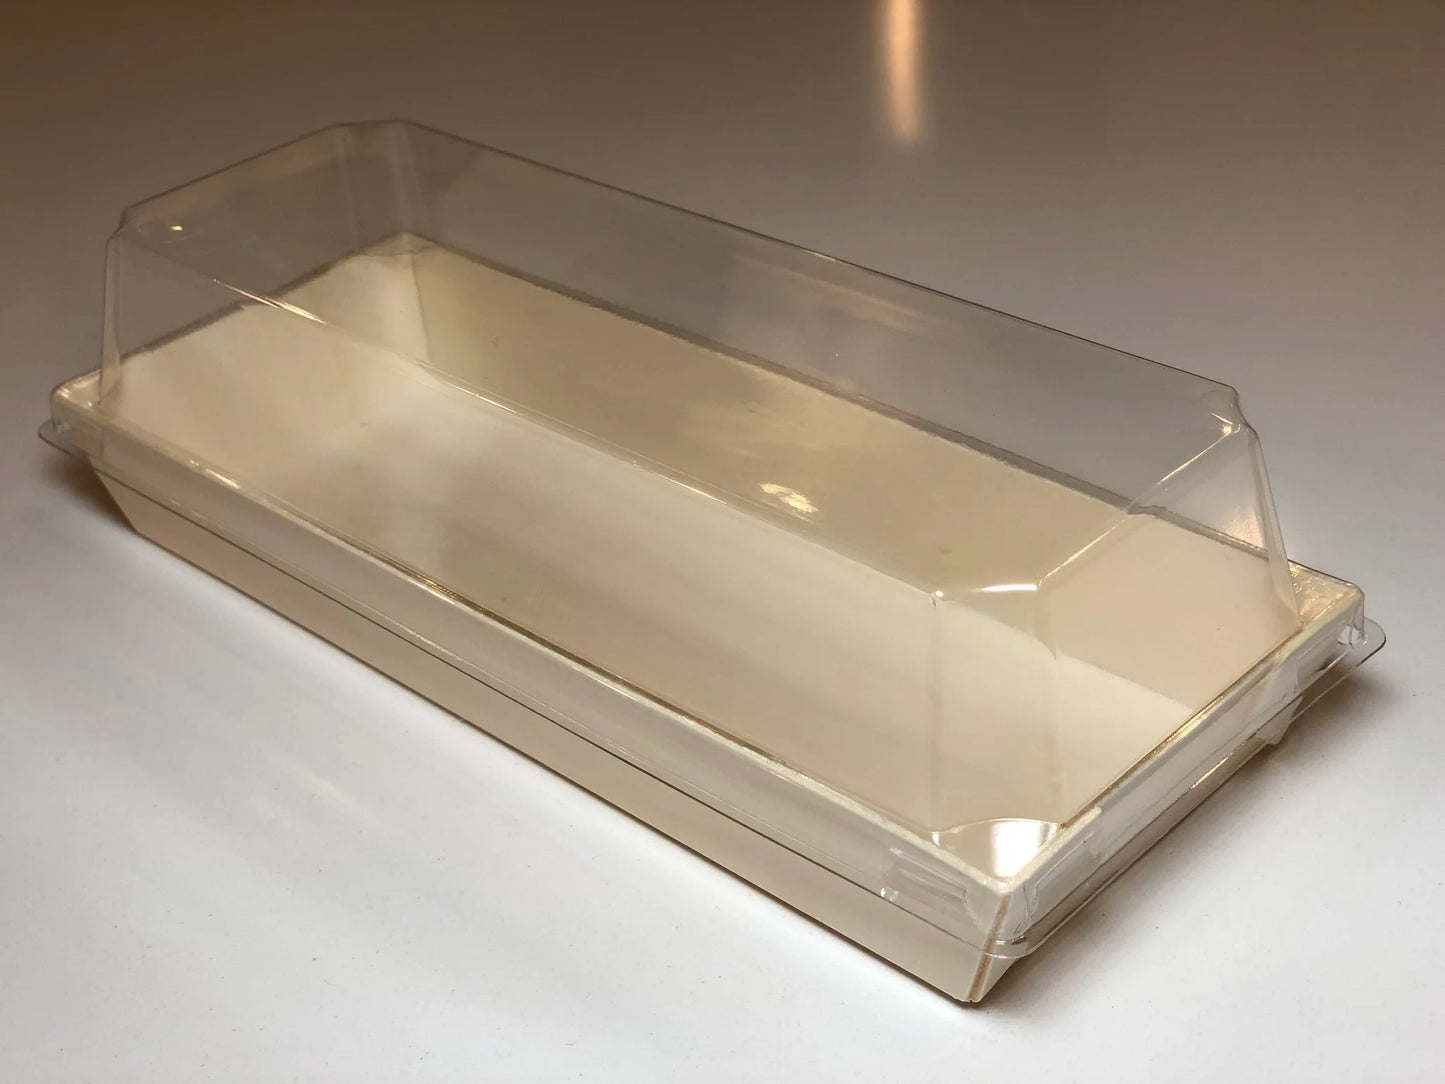 9.8" X 3" X 1.5" Covered Tray Set | Compostable Balsa Tray with RPET Lid | 100 of each